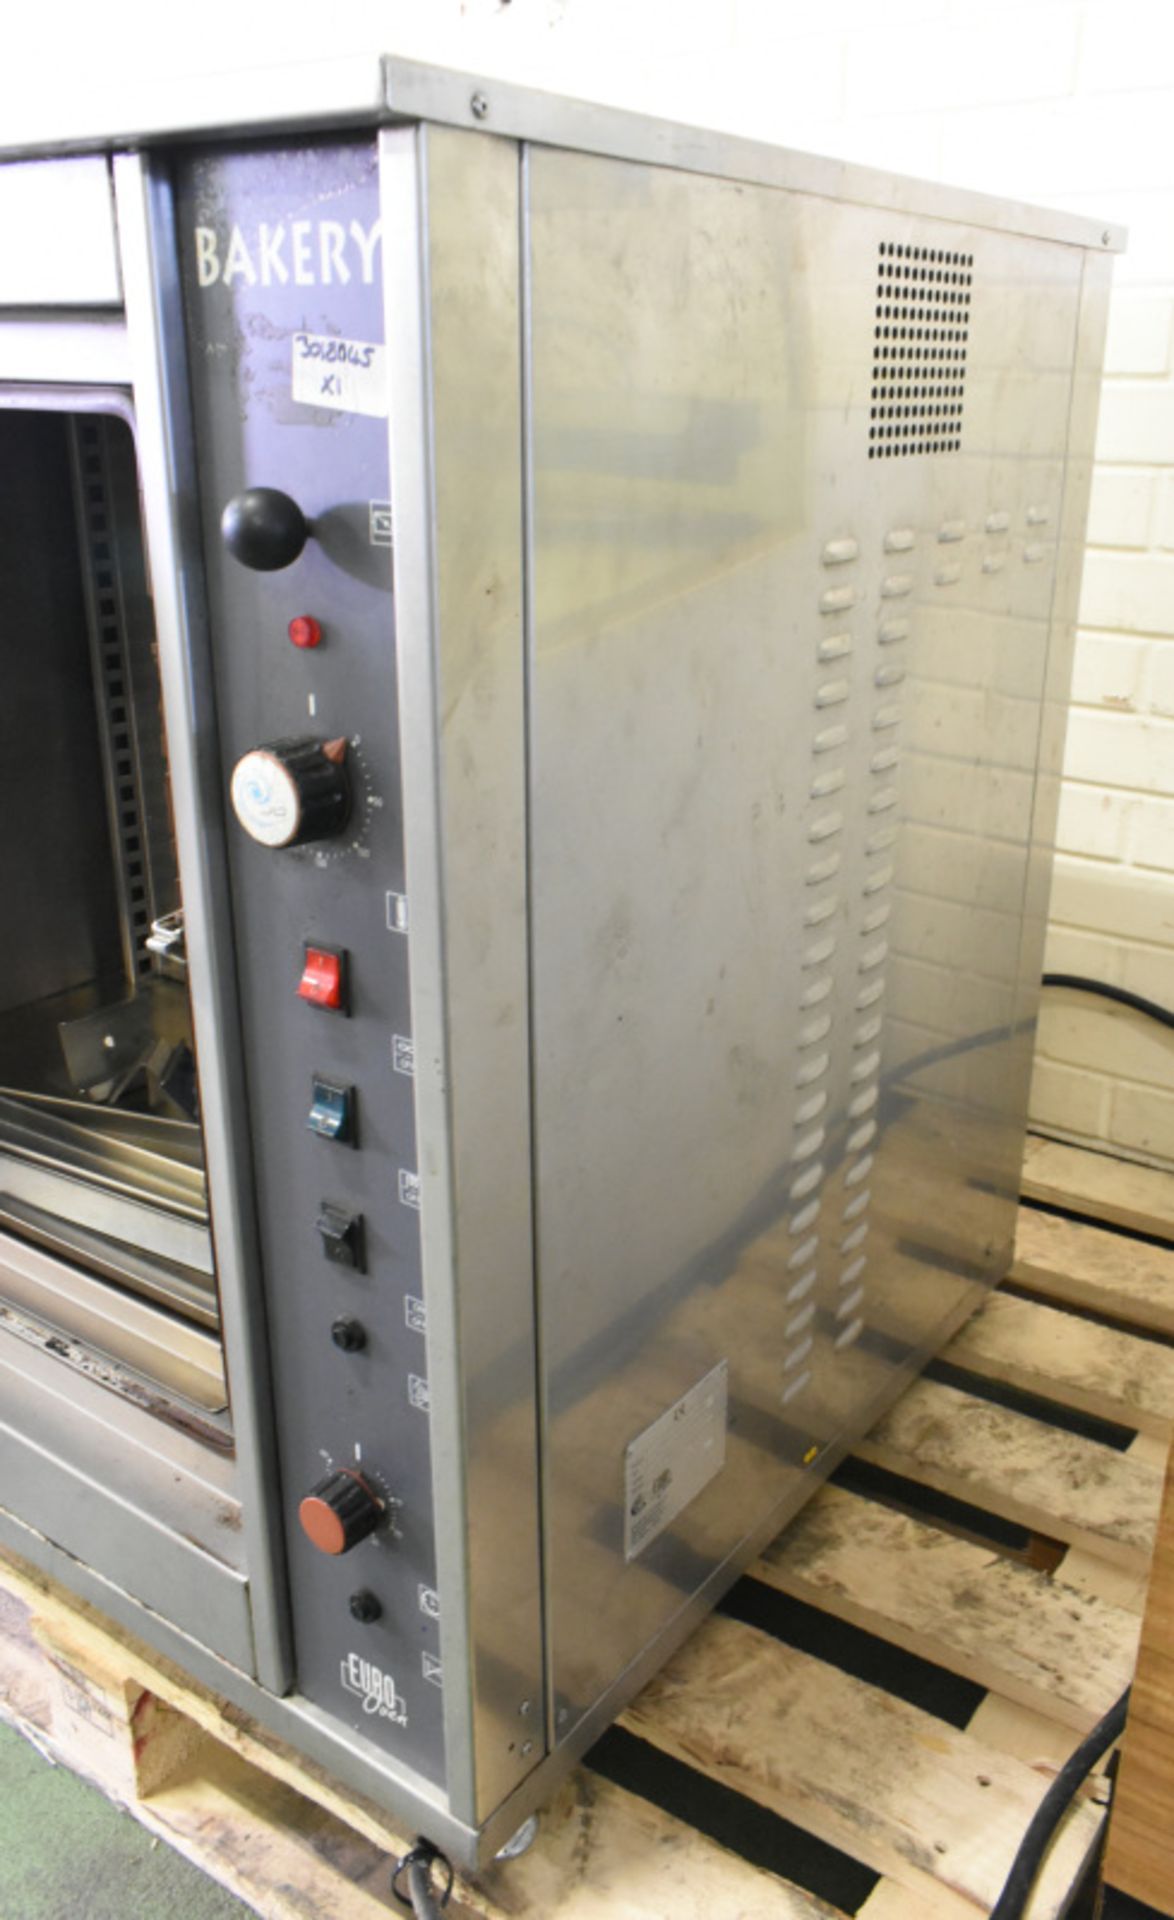 Euro bakery oven L 91 x W 73 x H 87cm - Image 4 of 6